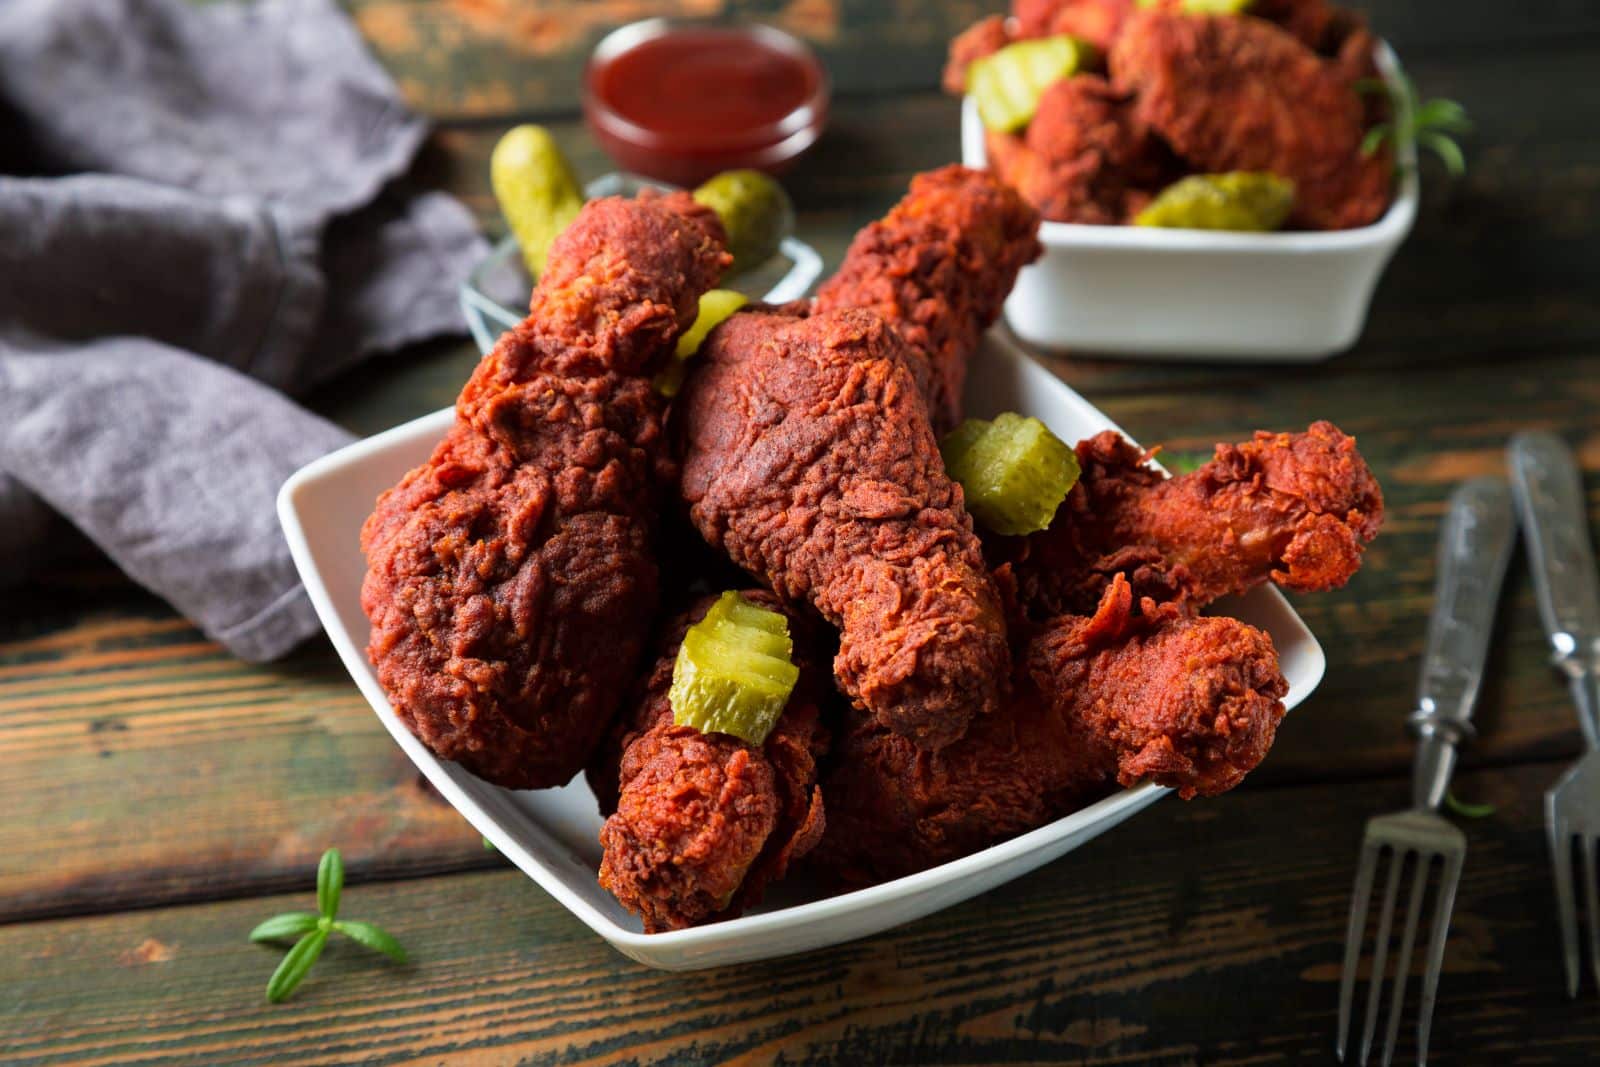 <p class="wp-caption-text">Image Credit: Shutterstock / Ruslan Mitin</p>  <p>No visit to Nashville is complete without sampling hot chicken, a local specialty. Head to Prince’s Hot Chicken Shack or Hattie B’s for a fiery and flavorful culinary experience that’s sure to leave you craving more.</p>